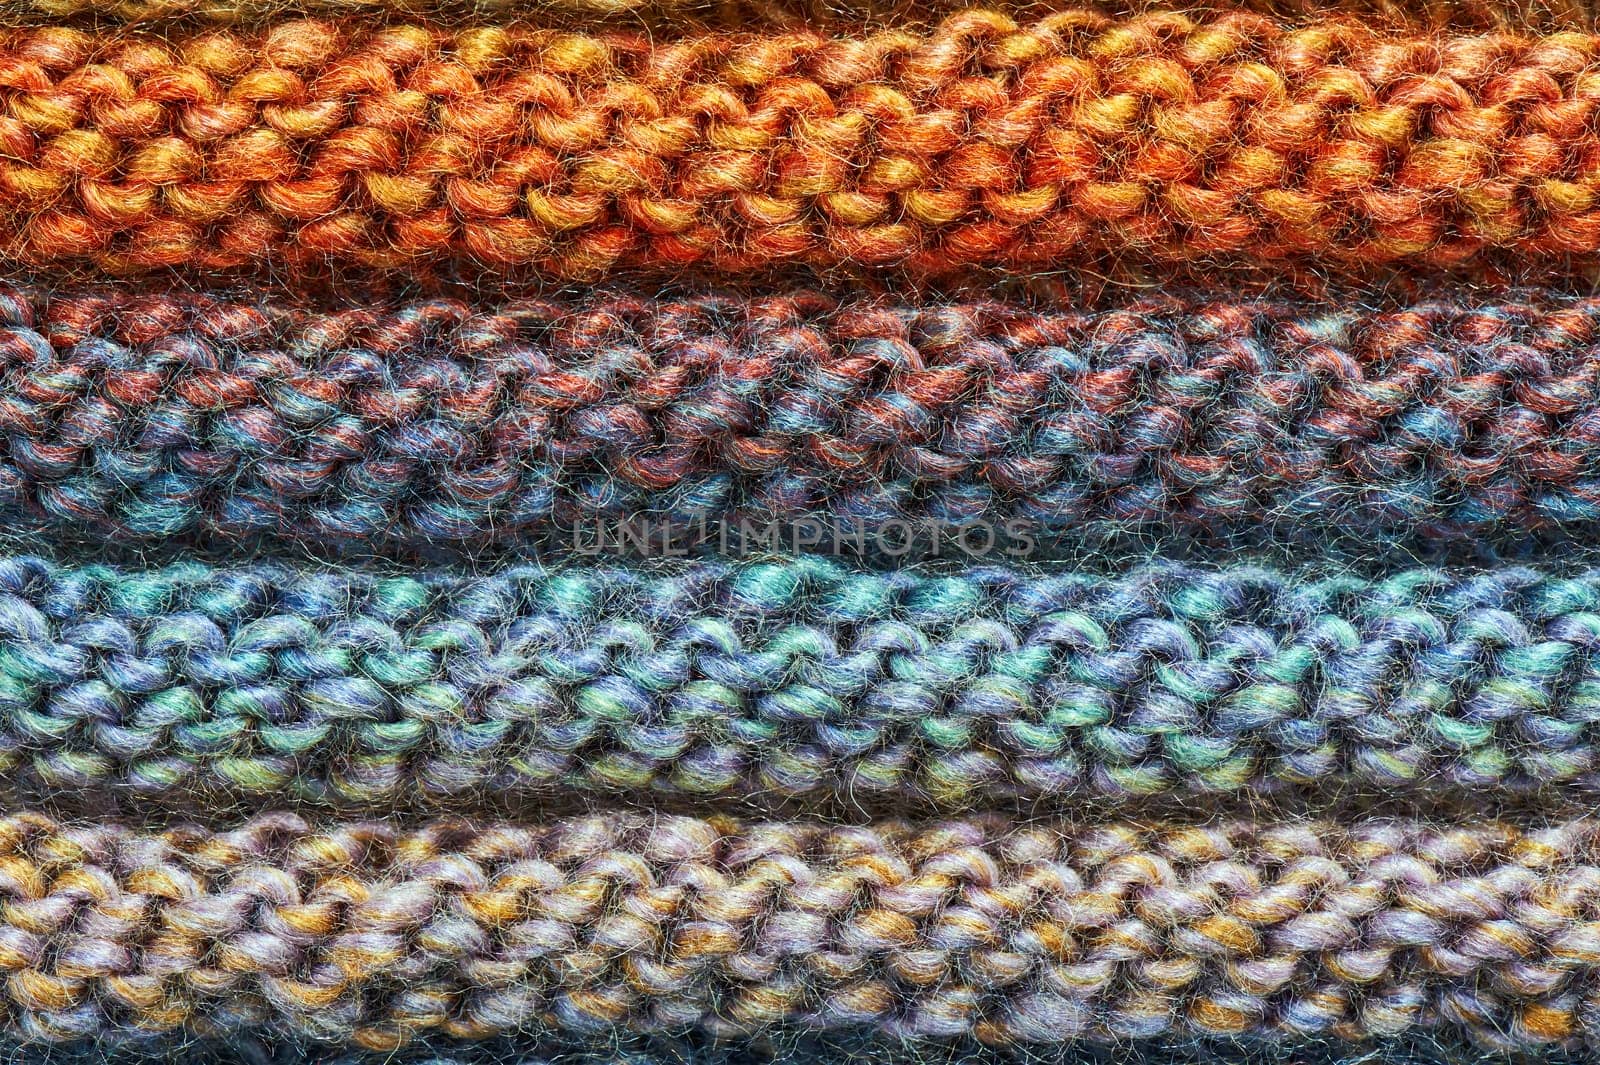 Abstract hand knitted cloth texture. Background and texture for design